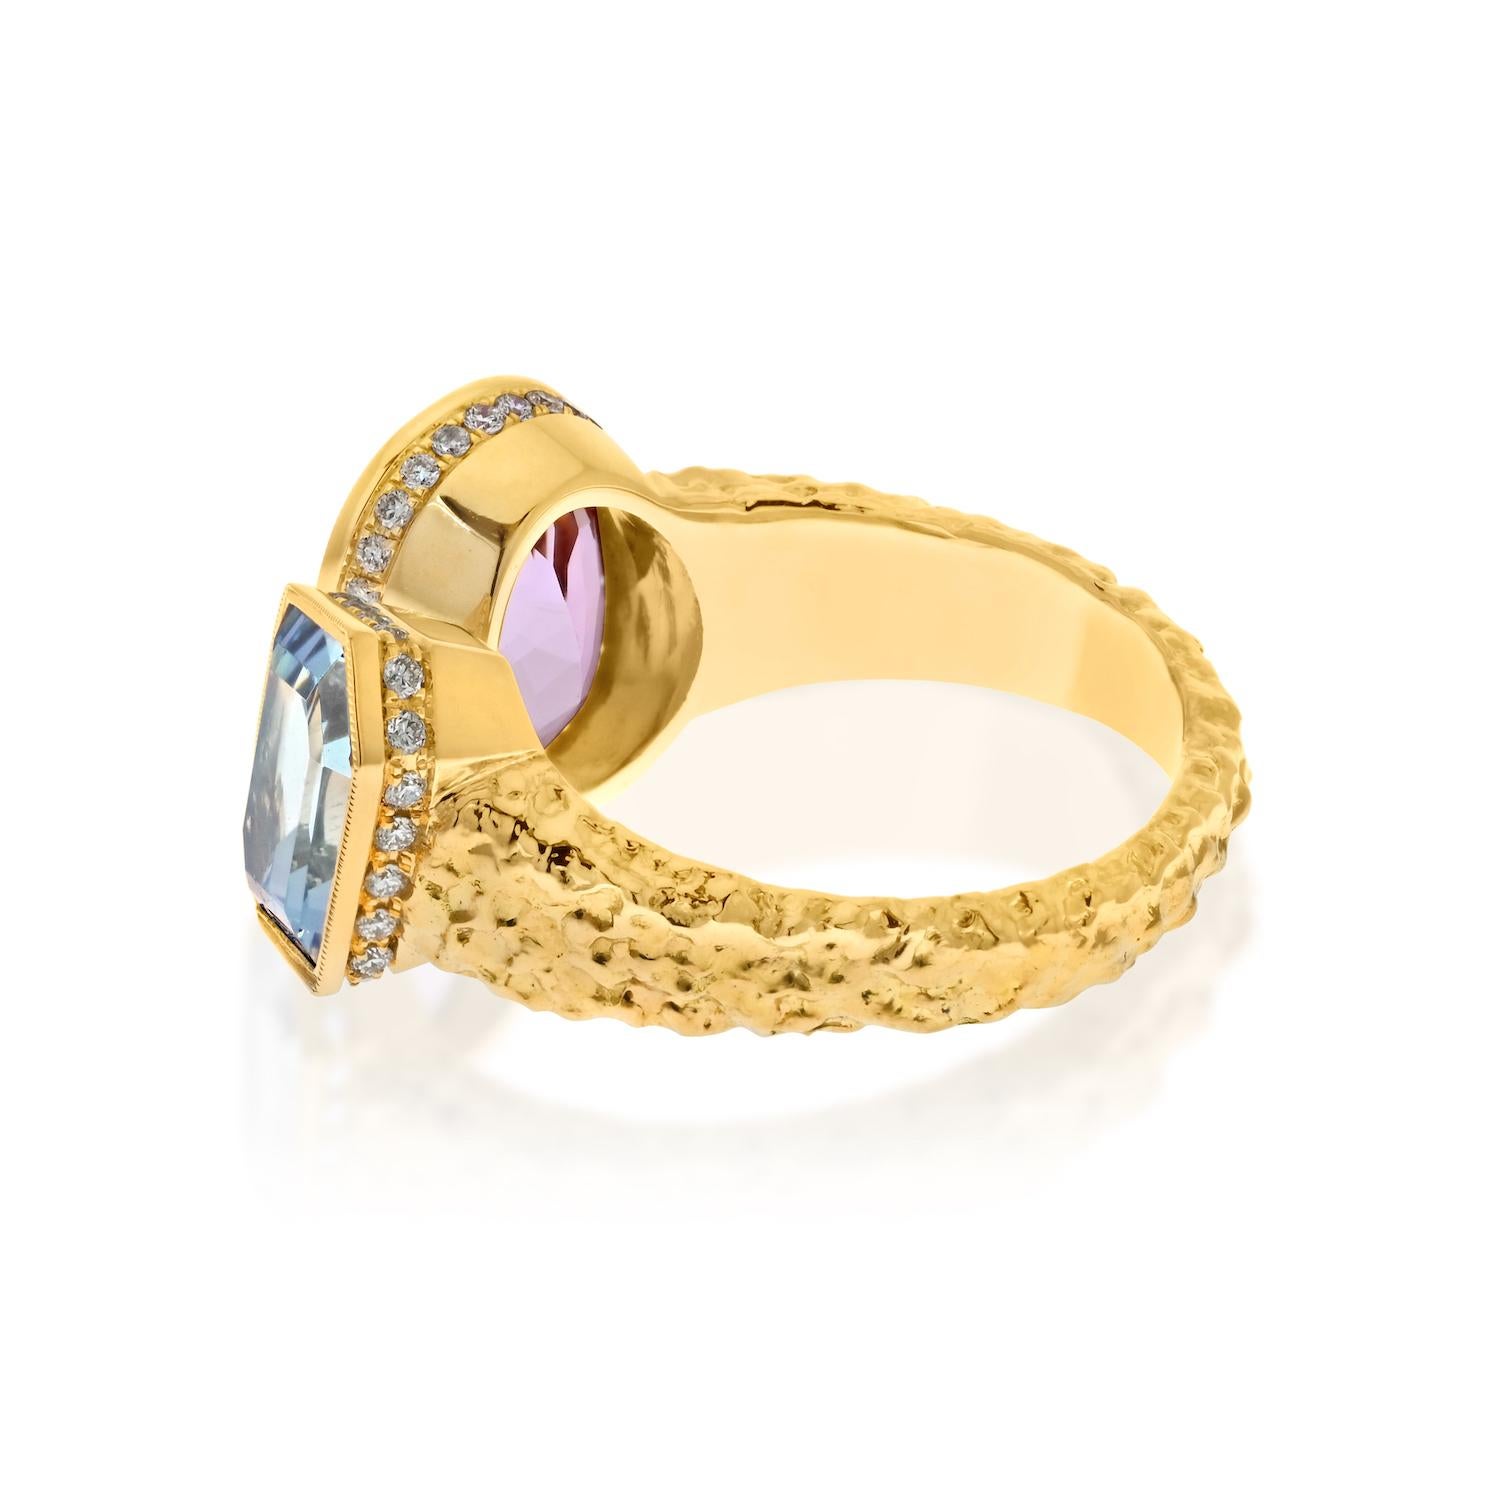 A Symphony of Colors: Aquamarine and Kunzite Ring in 18K Yellow Gold
Sometimes, the most beautiful pieces of jewelry are those that express the sheer delight of colors and textures. This 18K yellow gold ring, showcasing an aquamarine and kunzite, is